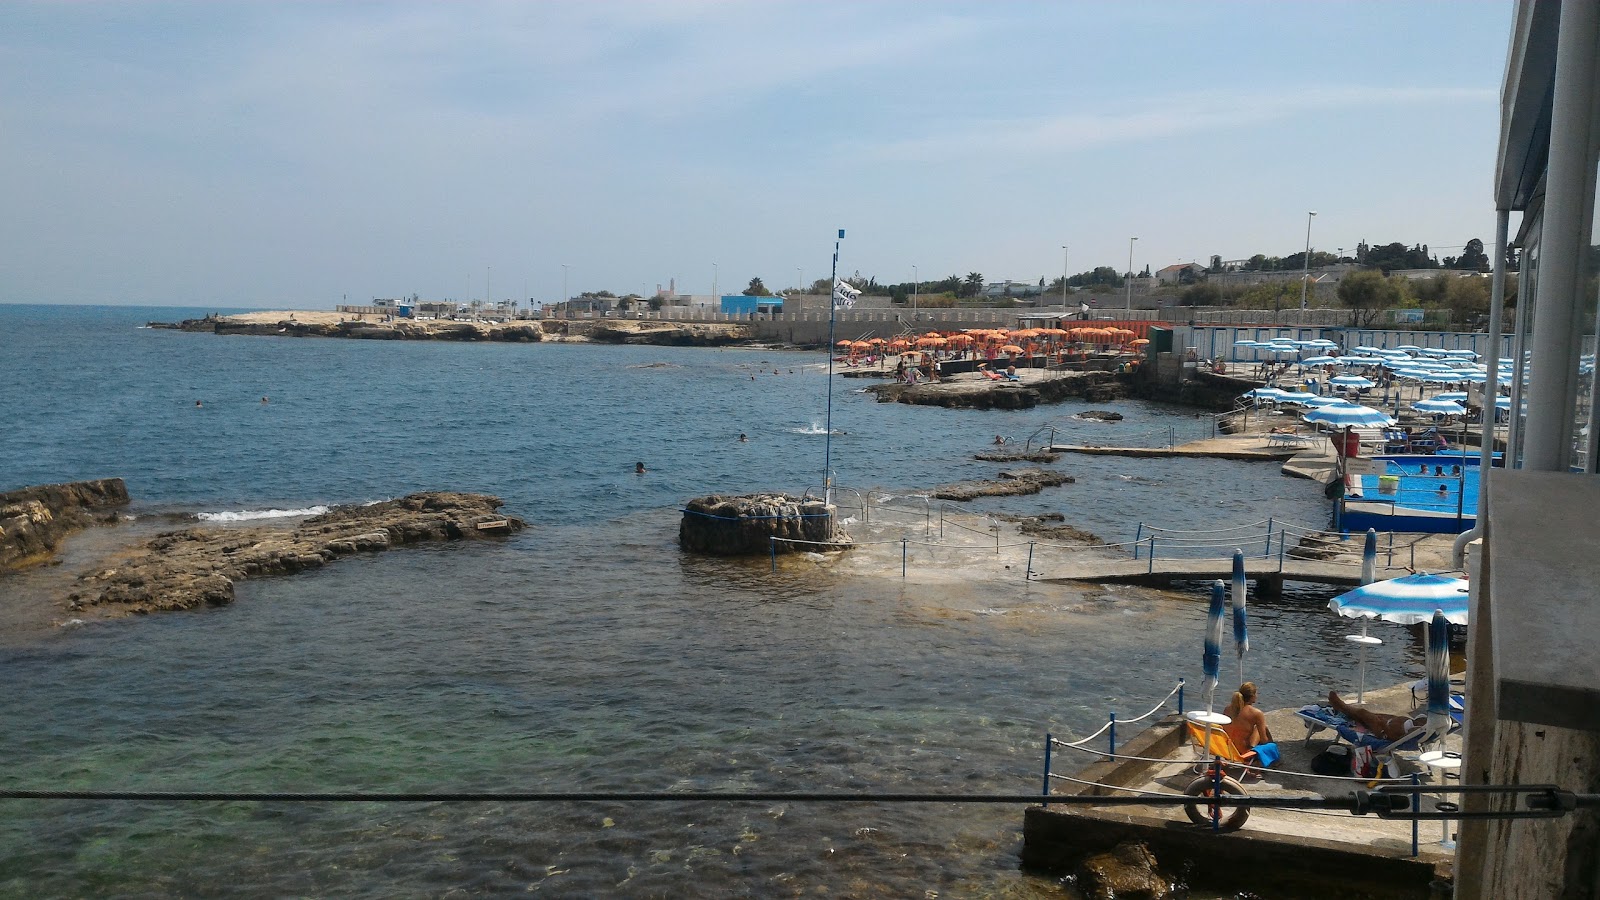 Photo of Lido Apulia with concrete cover surface